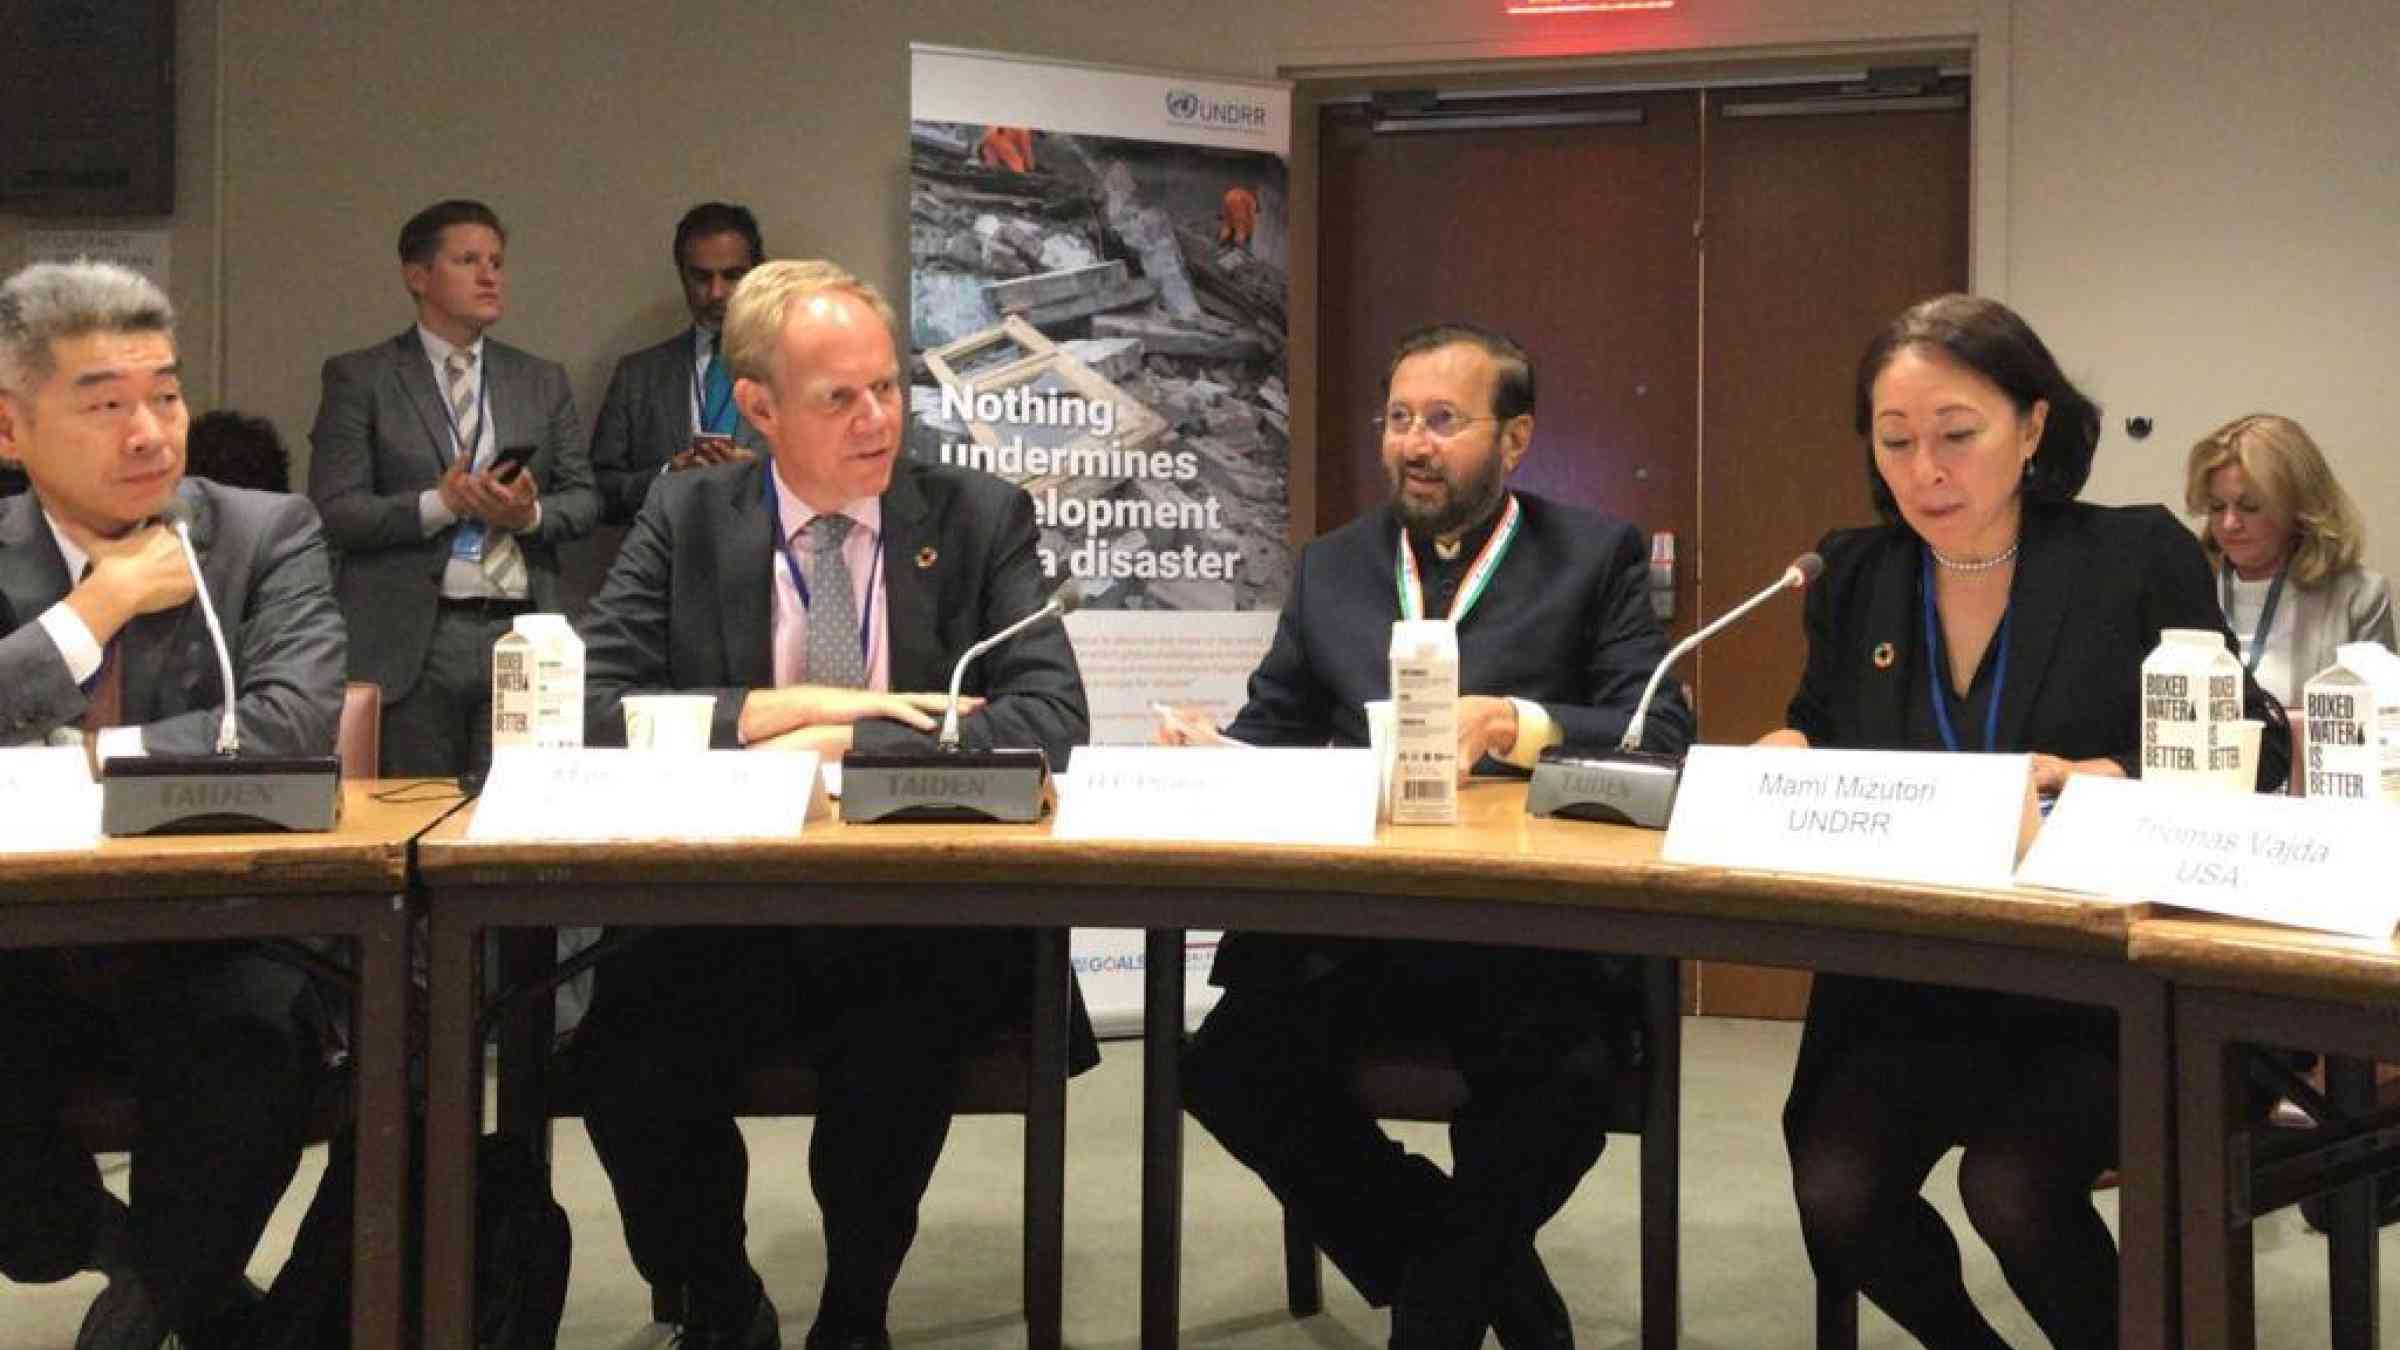 Prakash Javadekar, India’s Minister for Environment and Climate Change (centre), Matthew Rycroft, permanent Secretary for the UK Department for International Development (left) and Mami Mizutori, Head of the UN Office for Disaster Risk Reduction at the coalition event in New York.